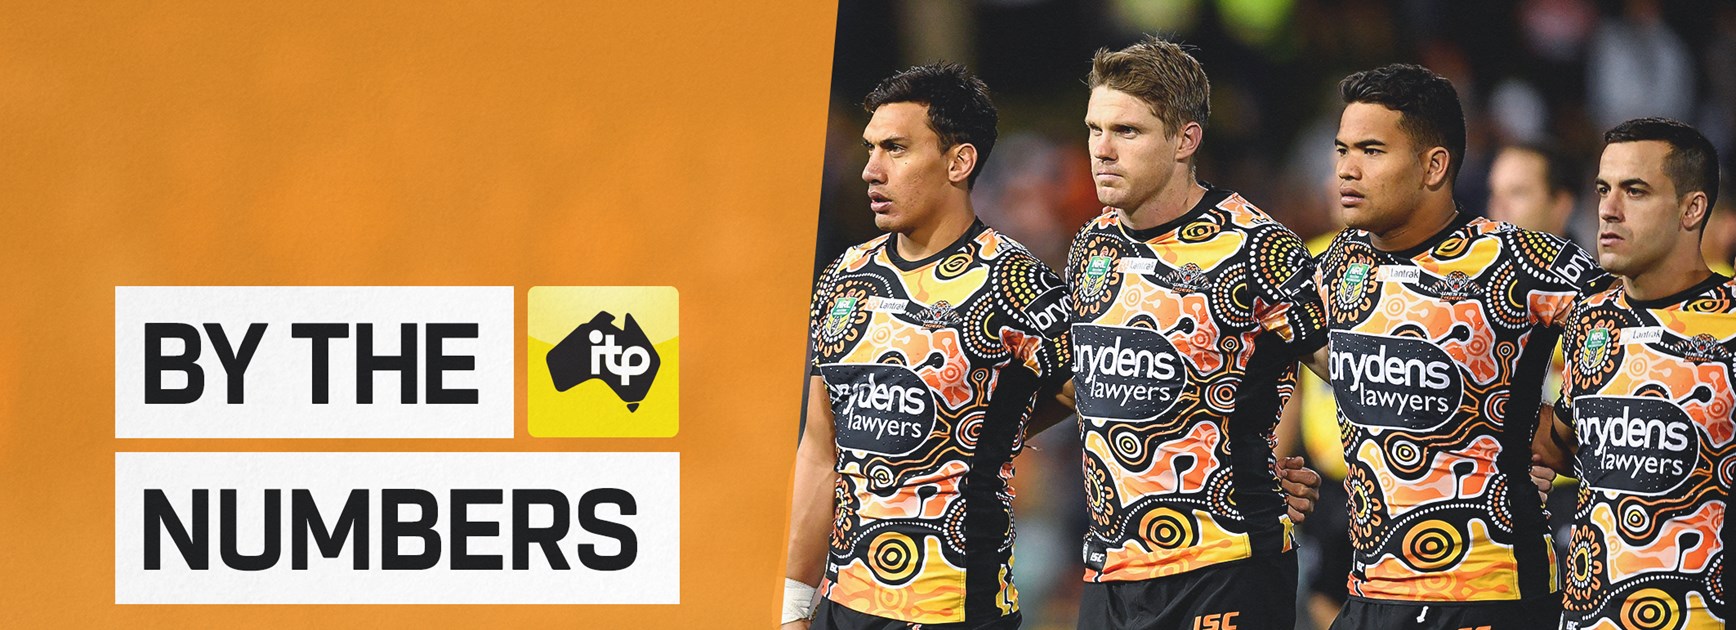 By the Numbers: Round 10